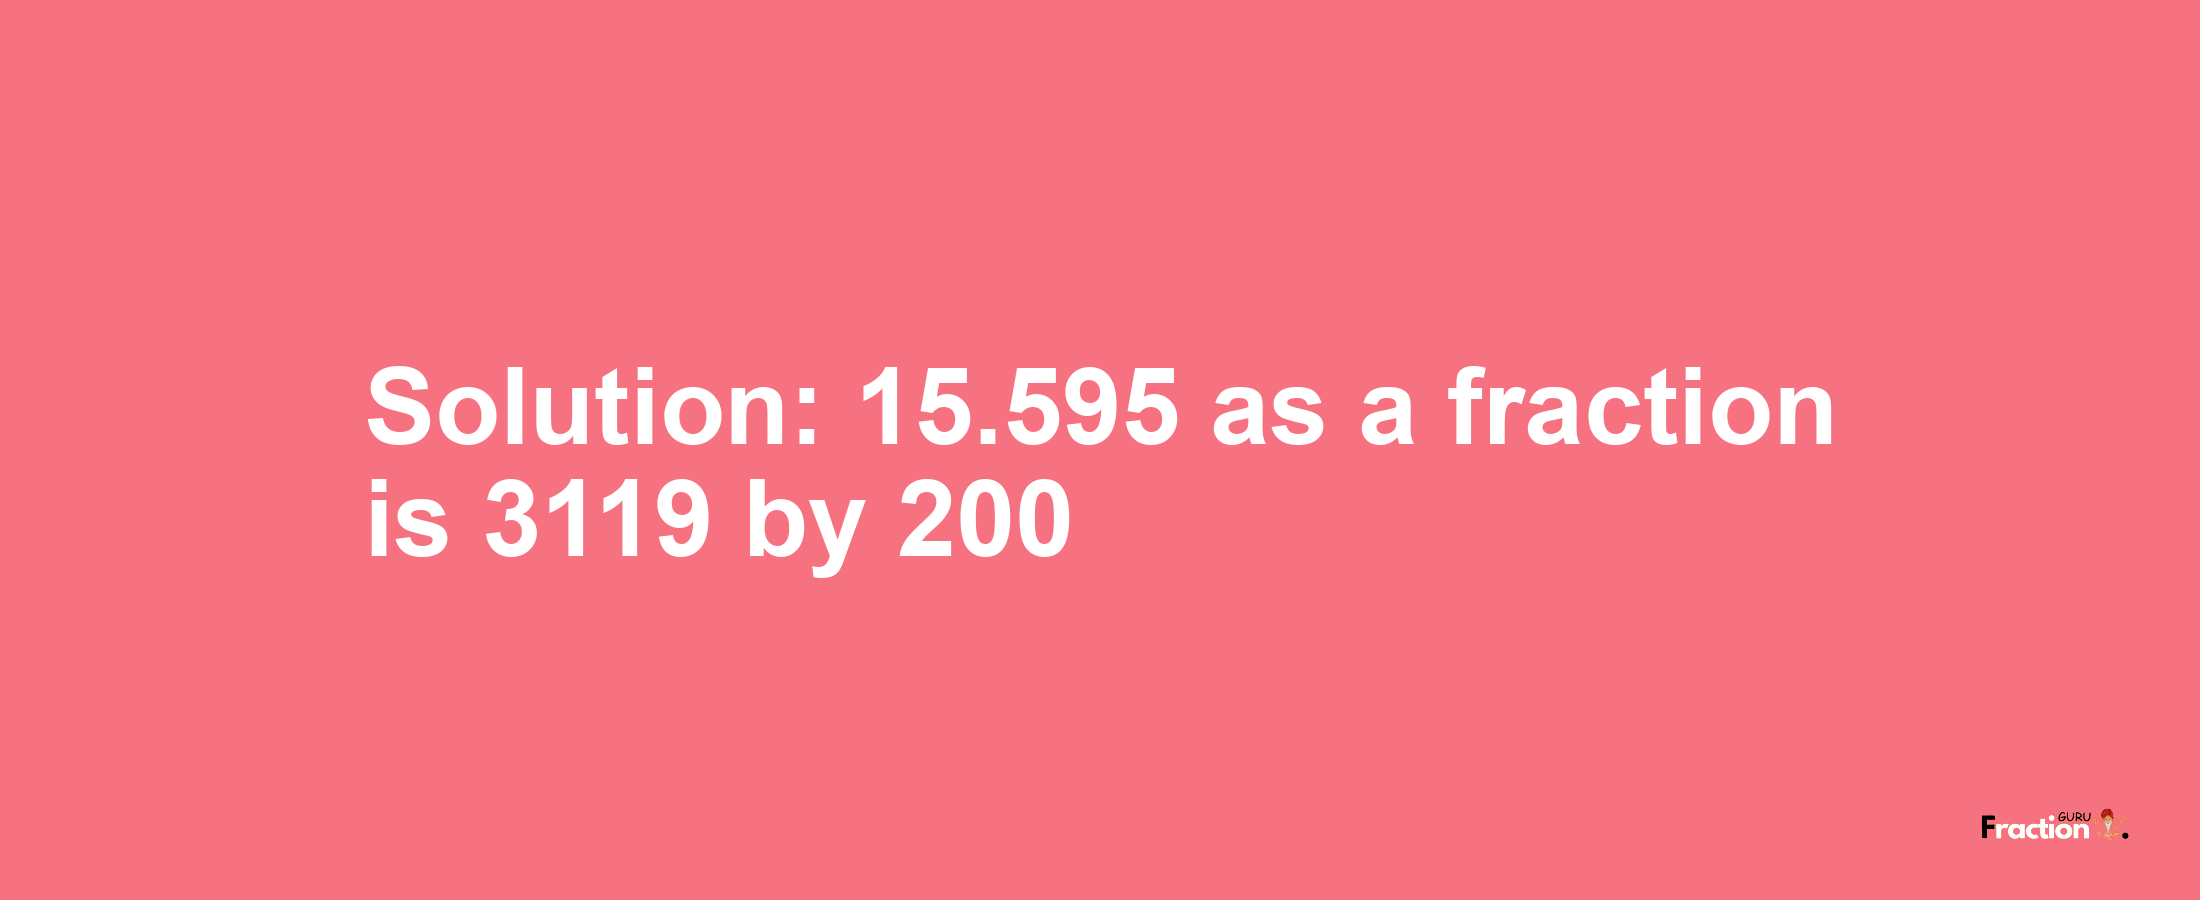 Solution:15.595 as a fraction is 3119/200